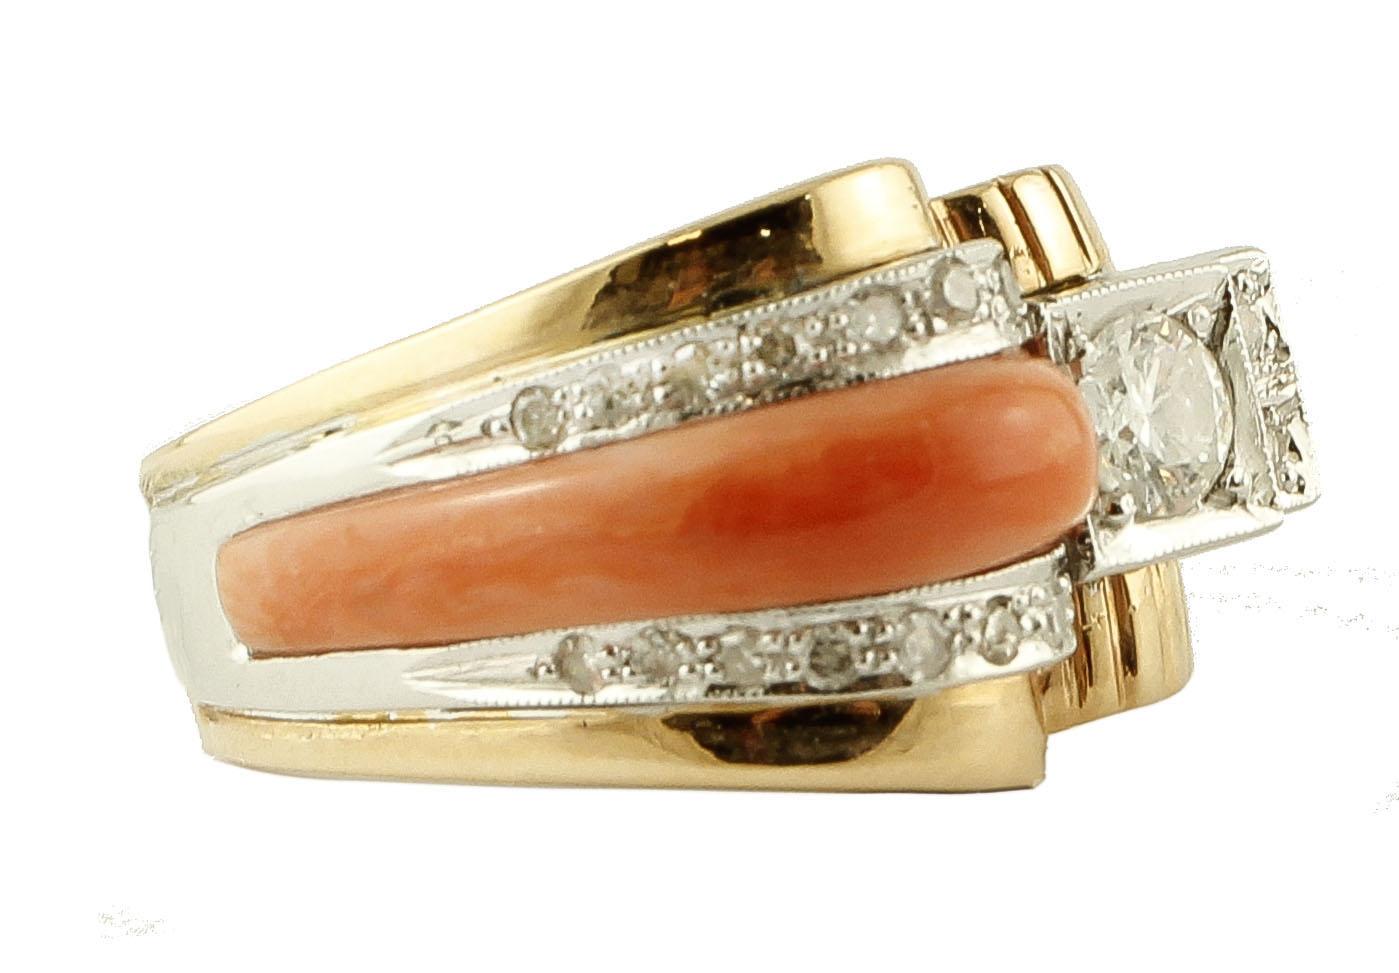 SHIPPING POLICY:
No additional costs will be added to this order.
Shipping costs will be totally covered by the seller (customs duties included).

Gorgeous retro ring in 14k yellow and white gold structure, embellished with elatius coral and